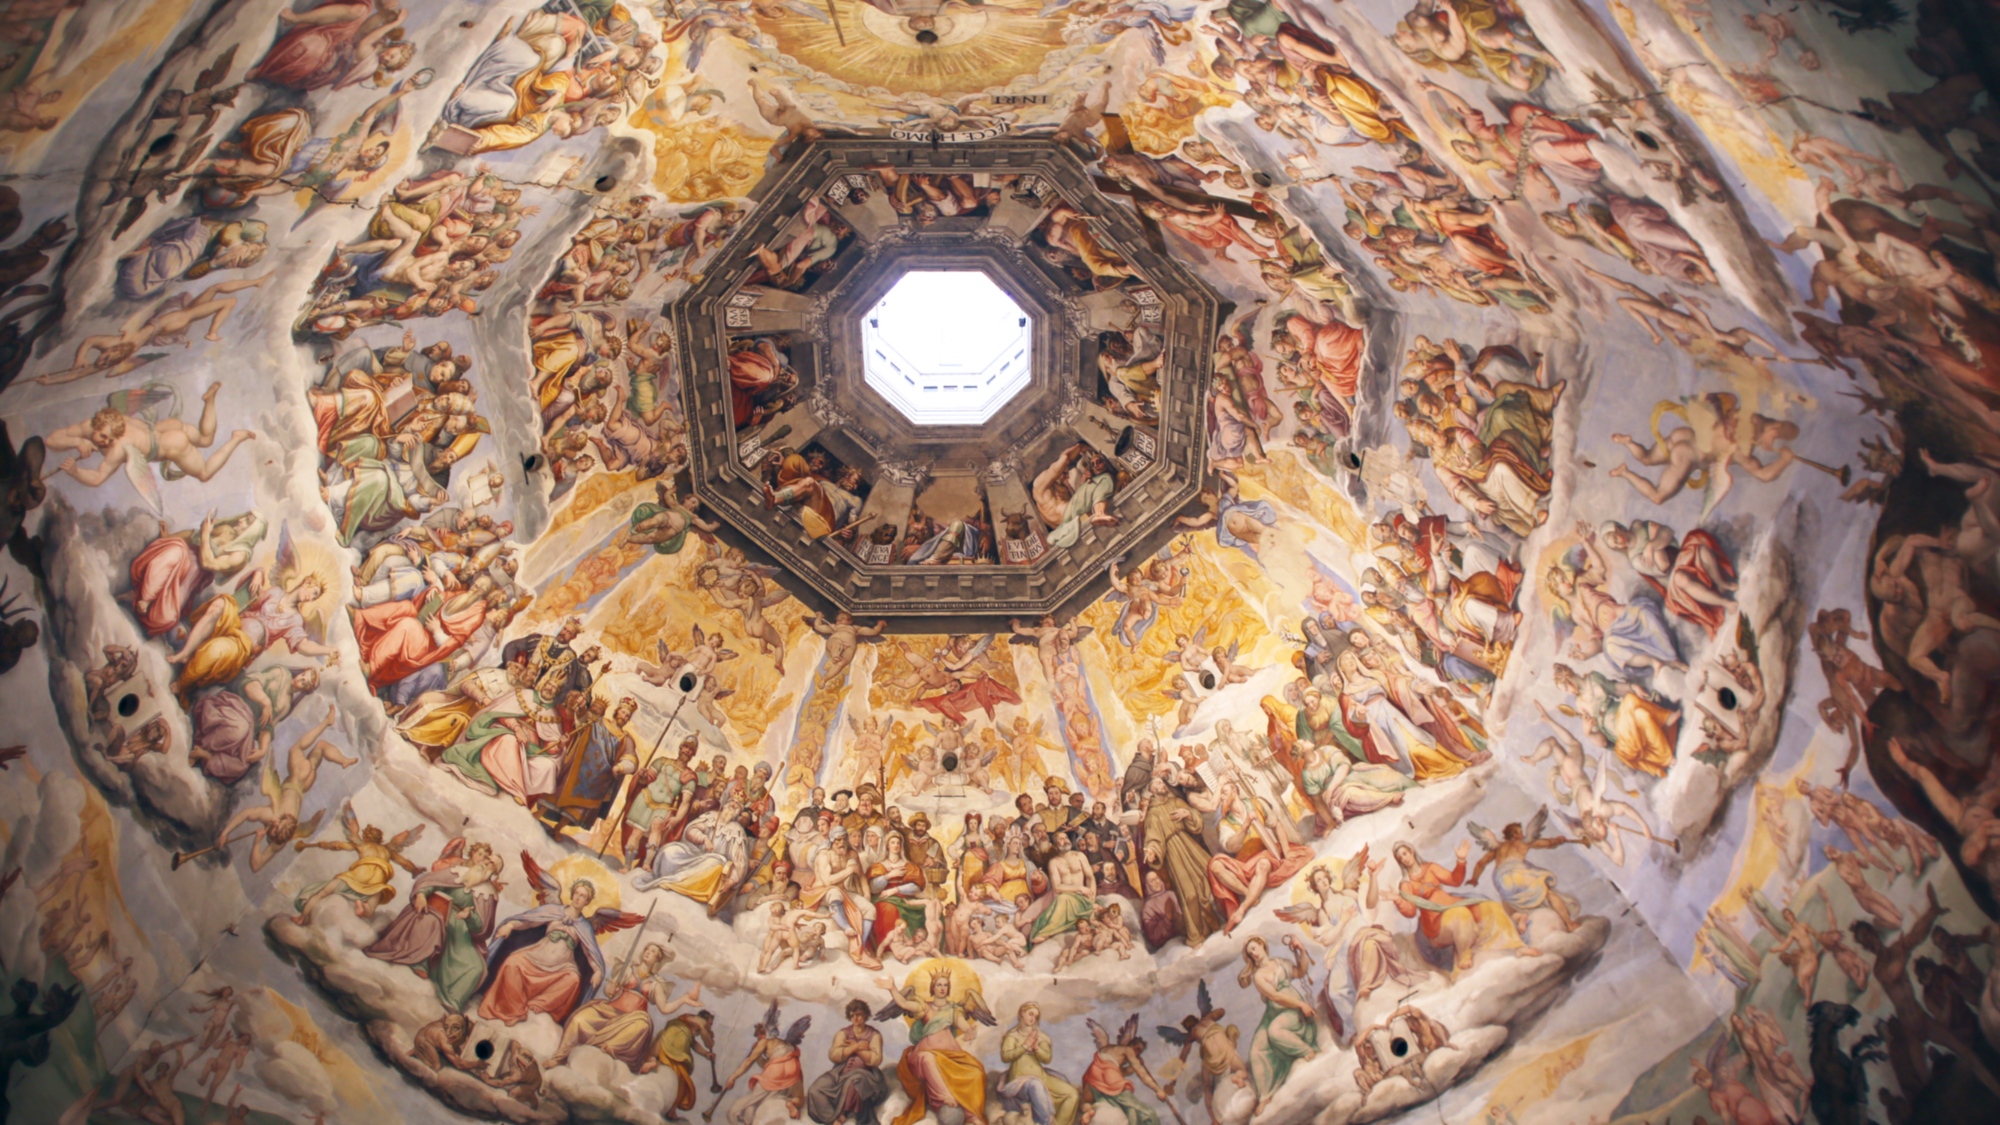 The frescoed interior of the Cupola